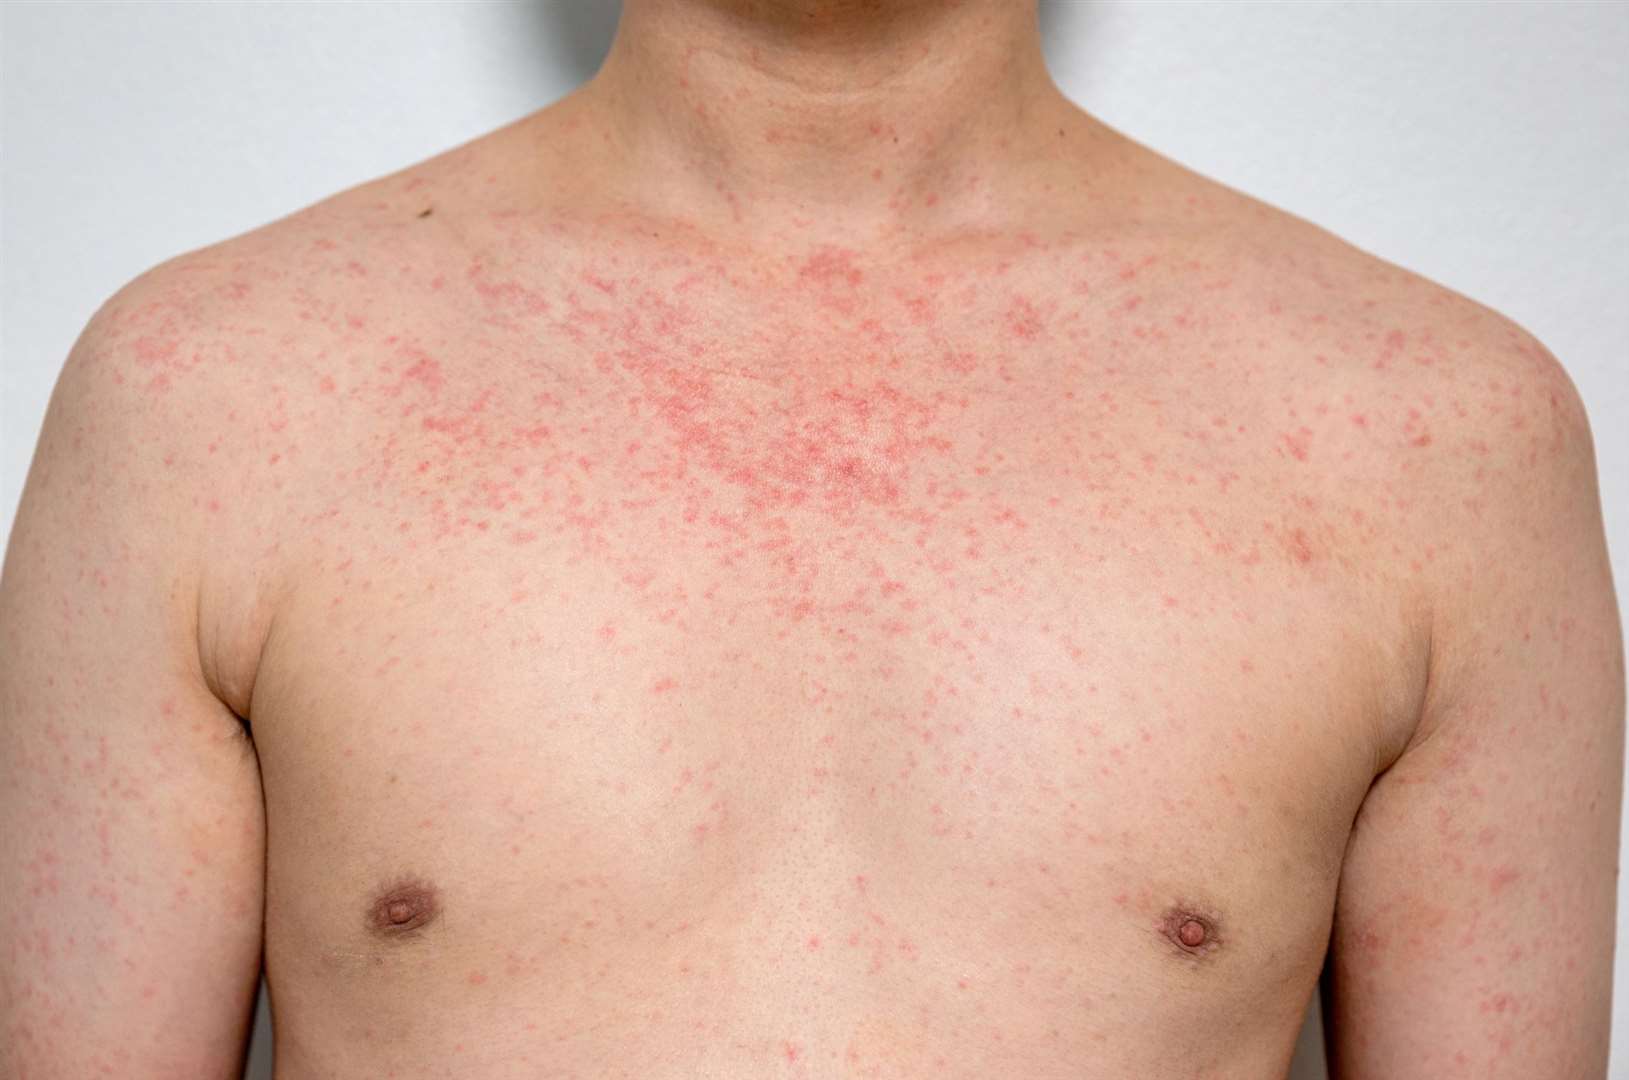 After initial cold-like symptoms patients develop a rash. Image: iStock.